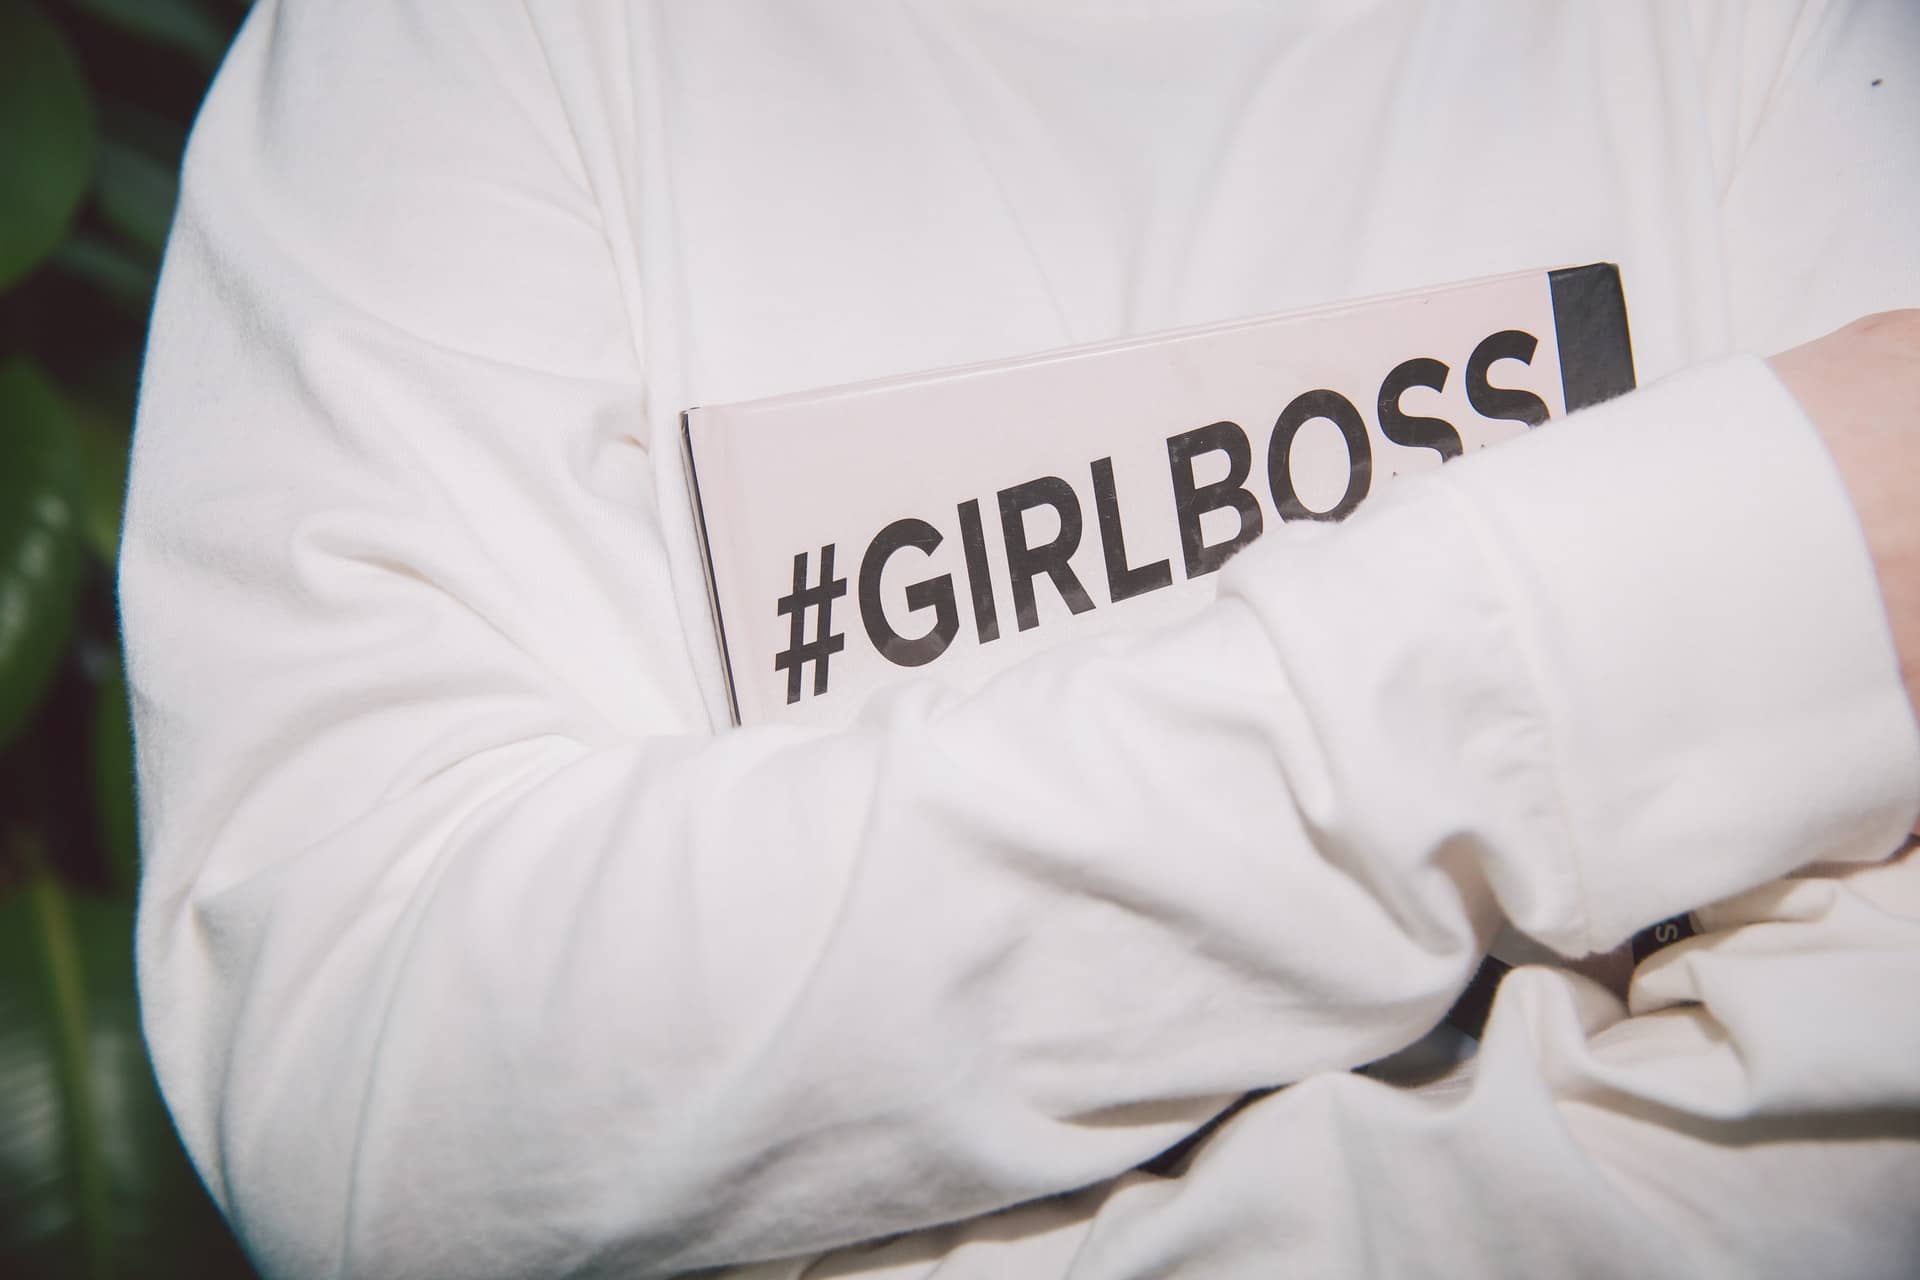 Girl holding a book having #GirlBoss hashtag on its cover